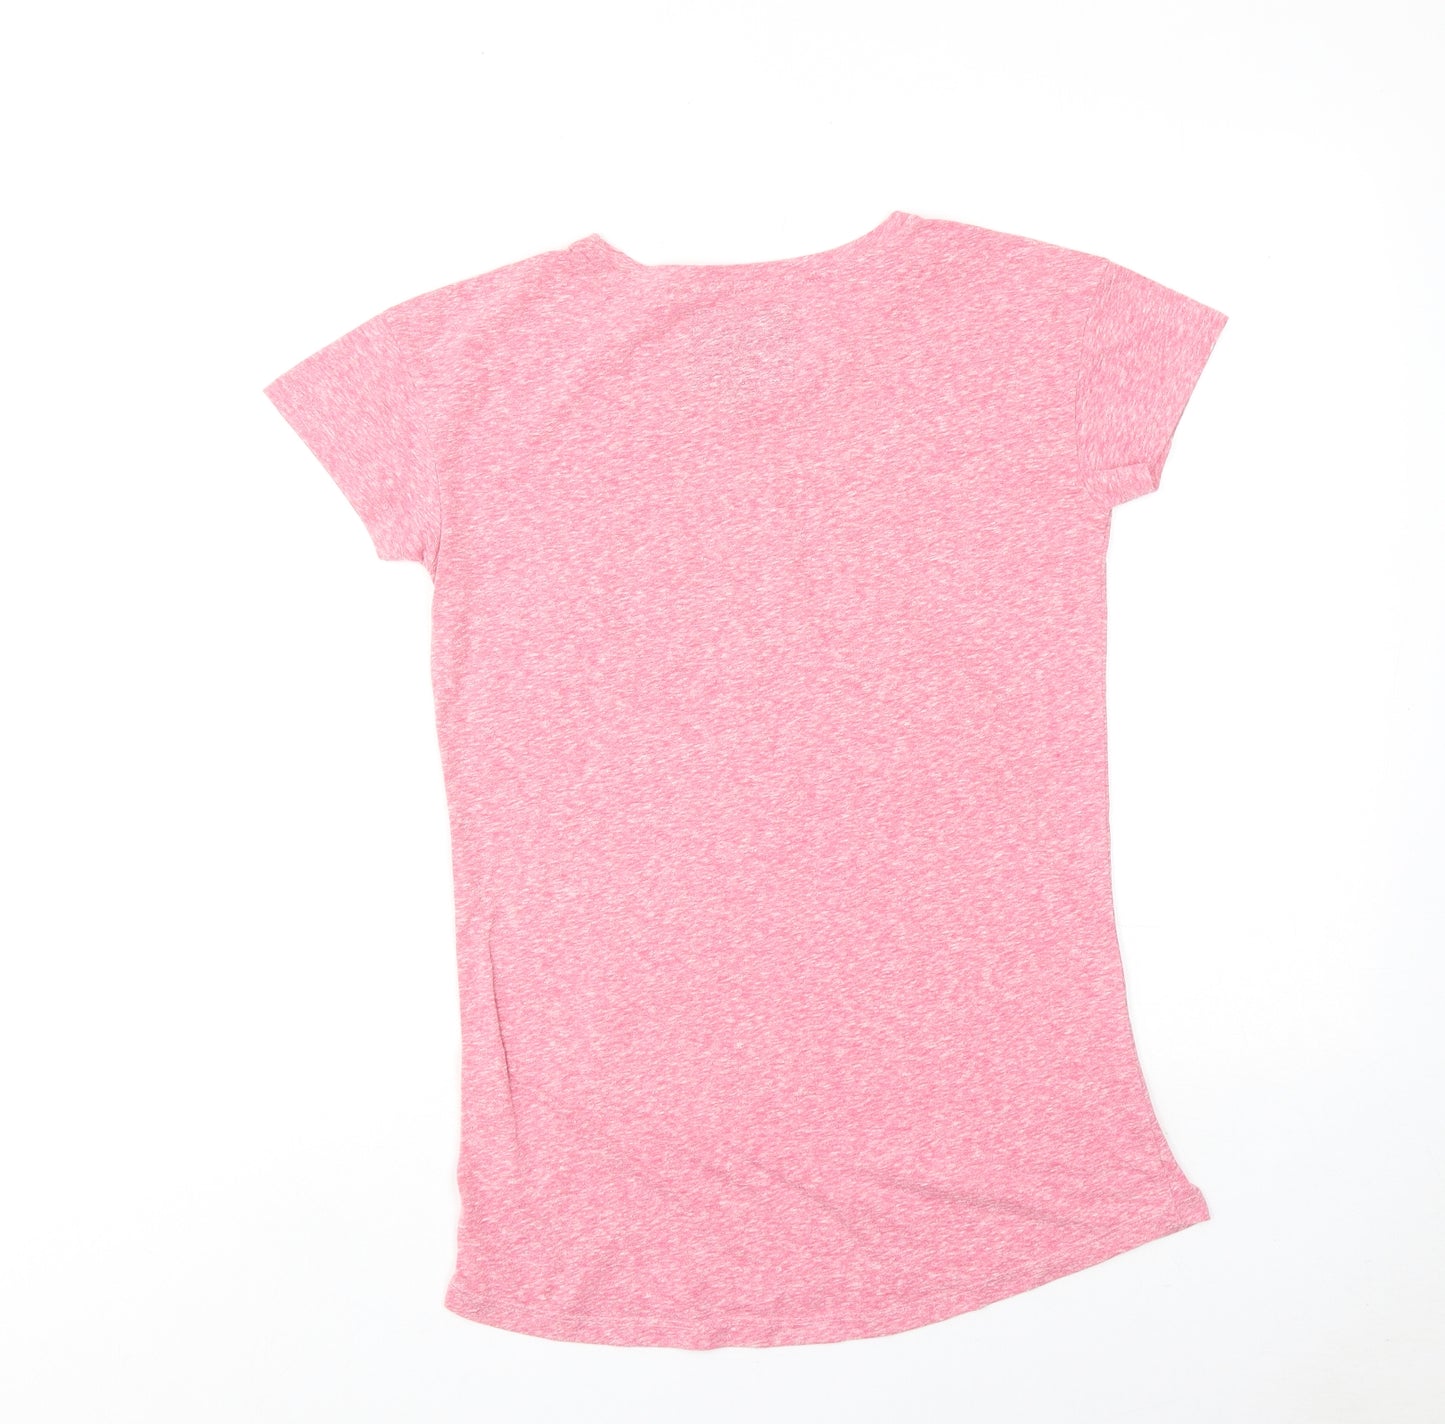 Superdry Womens Pink Geometric Polyester Basic T-Shirt Size S Round Neck